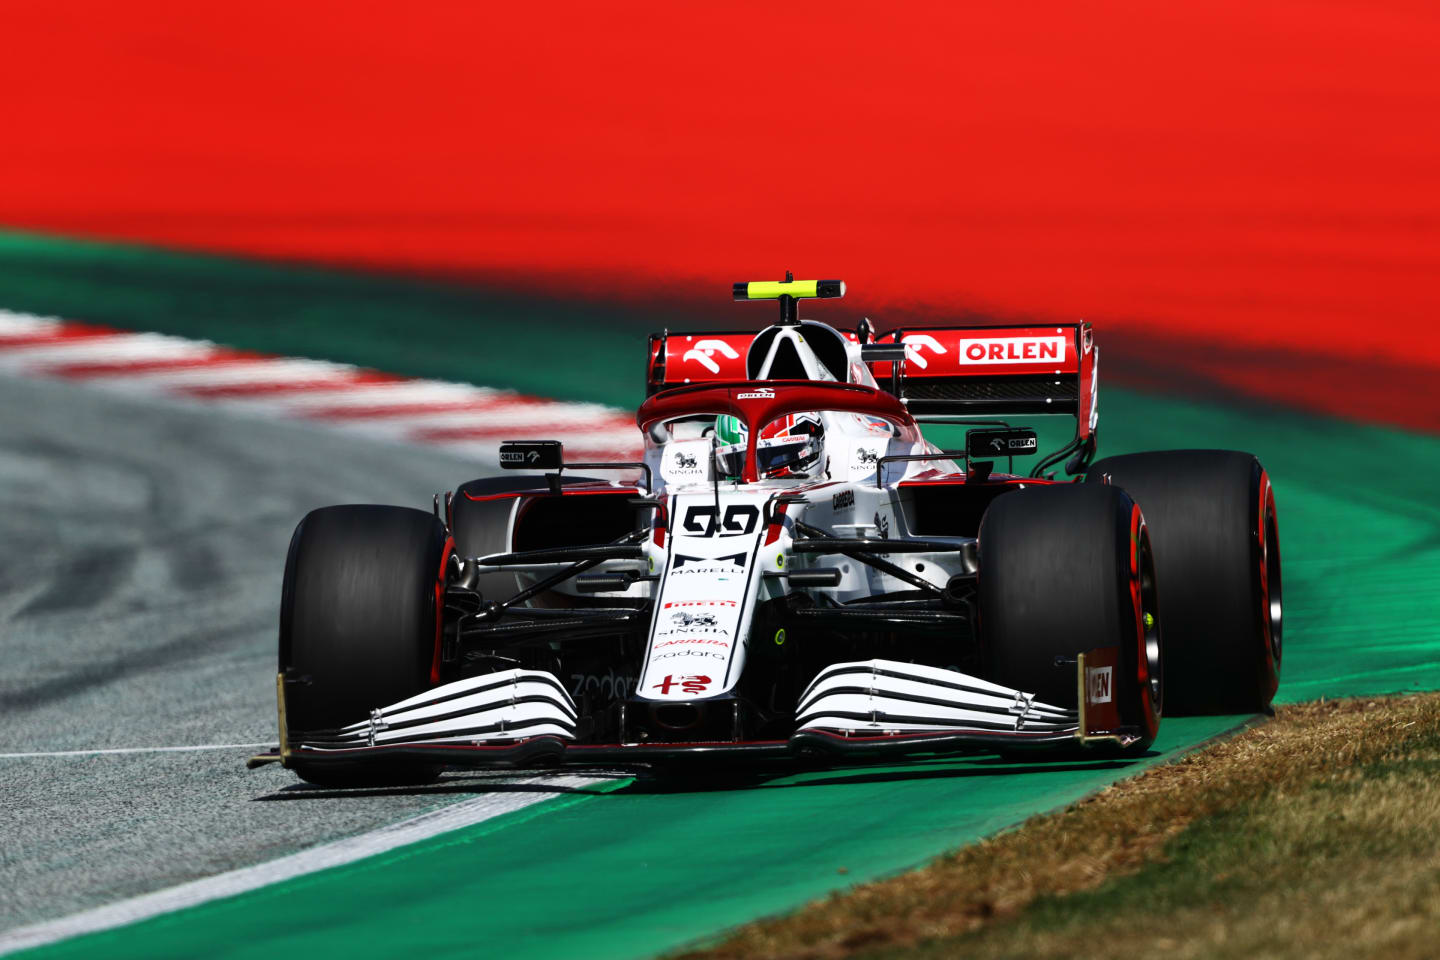 SPIELBERG, AUSTRIA - JULY 03: Antonio Giovinazzi of Italy driving the (99) Alfa Romeo Racing C41 Ferrari during qualifying ahead of the F1 Grand Prix of Austria at Red Bull Ring on July 03, 2021 in Spielberg, Austria. (Photo by Bryn Lennon/Getty Images)